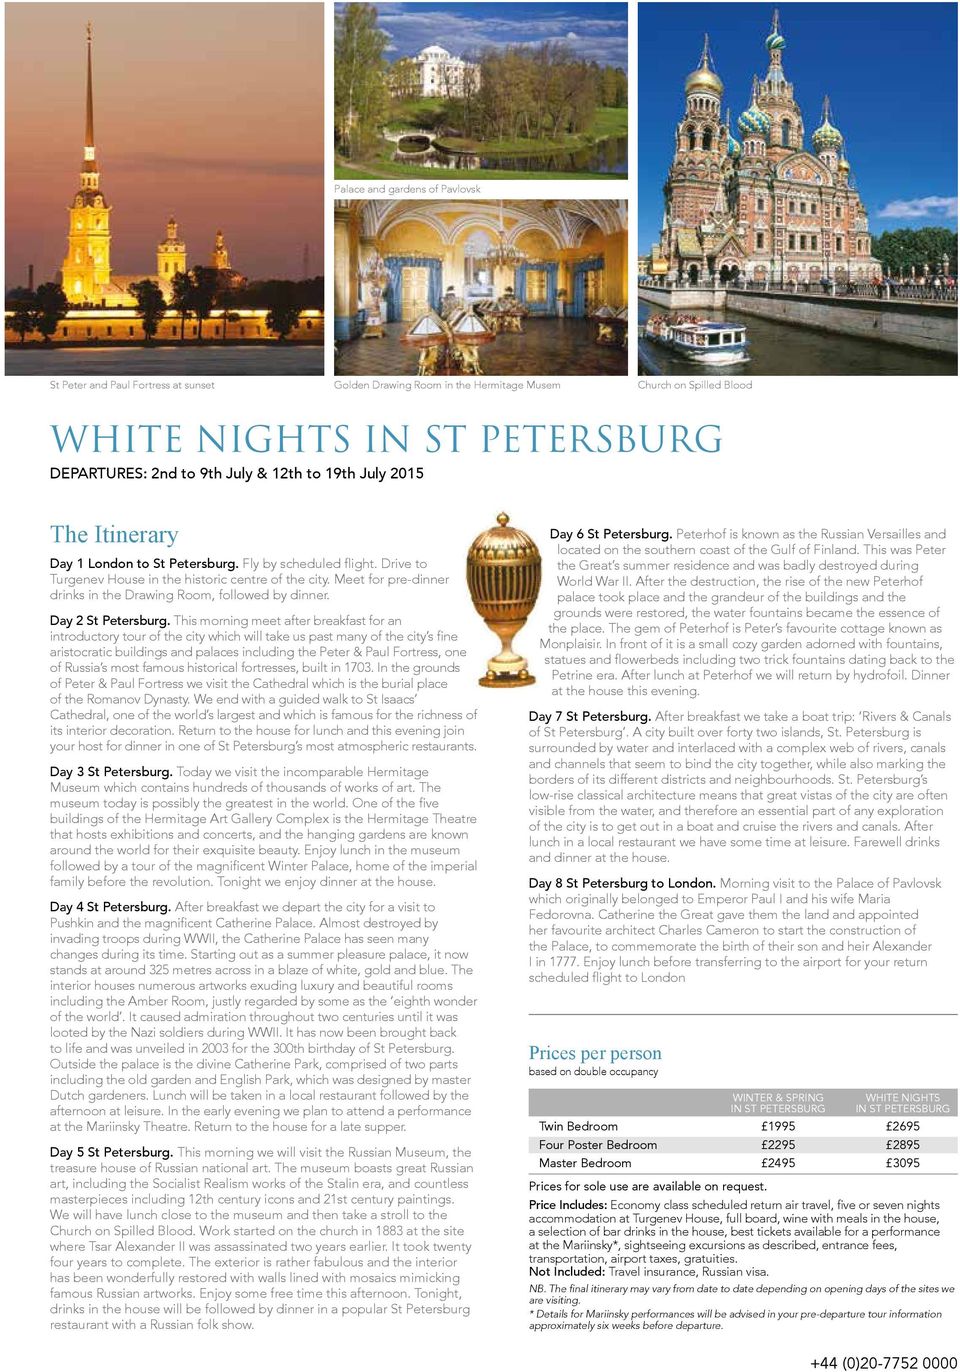 Meet for pre-dinner drinks in the Drawing Room, followed by dinner. Day 2 St Petersburg.